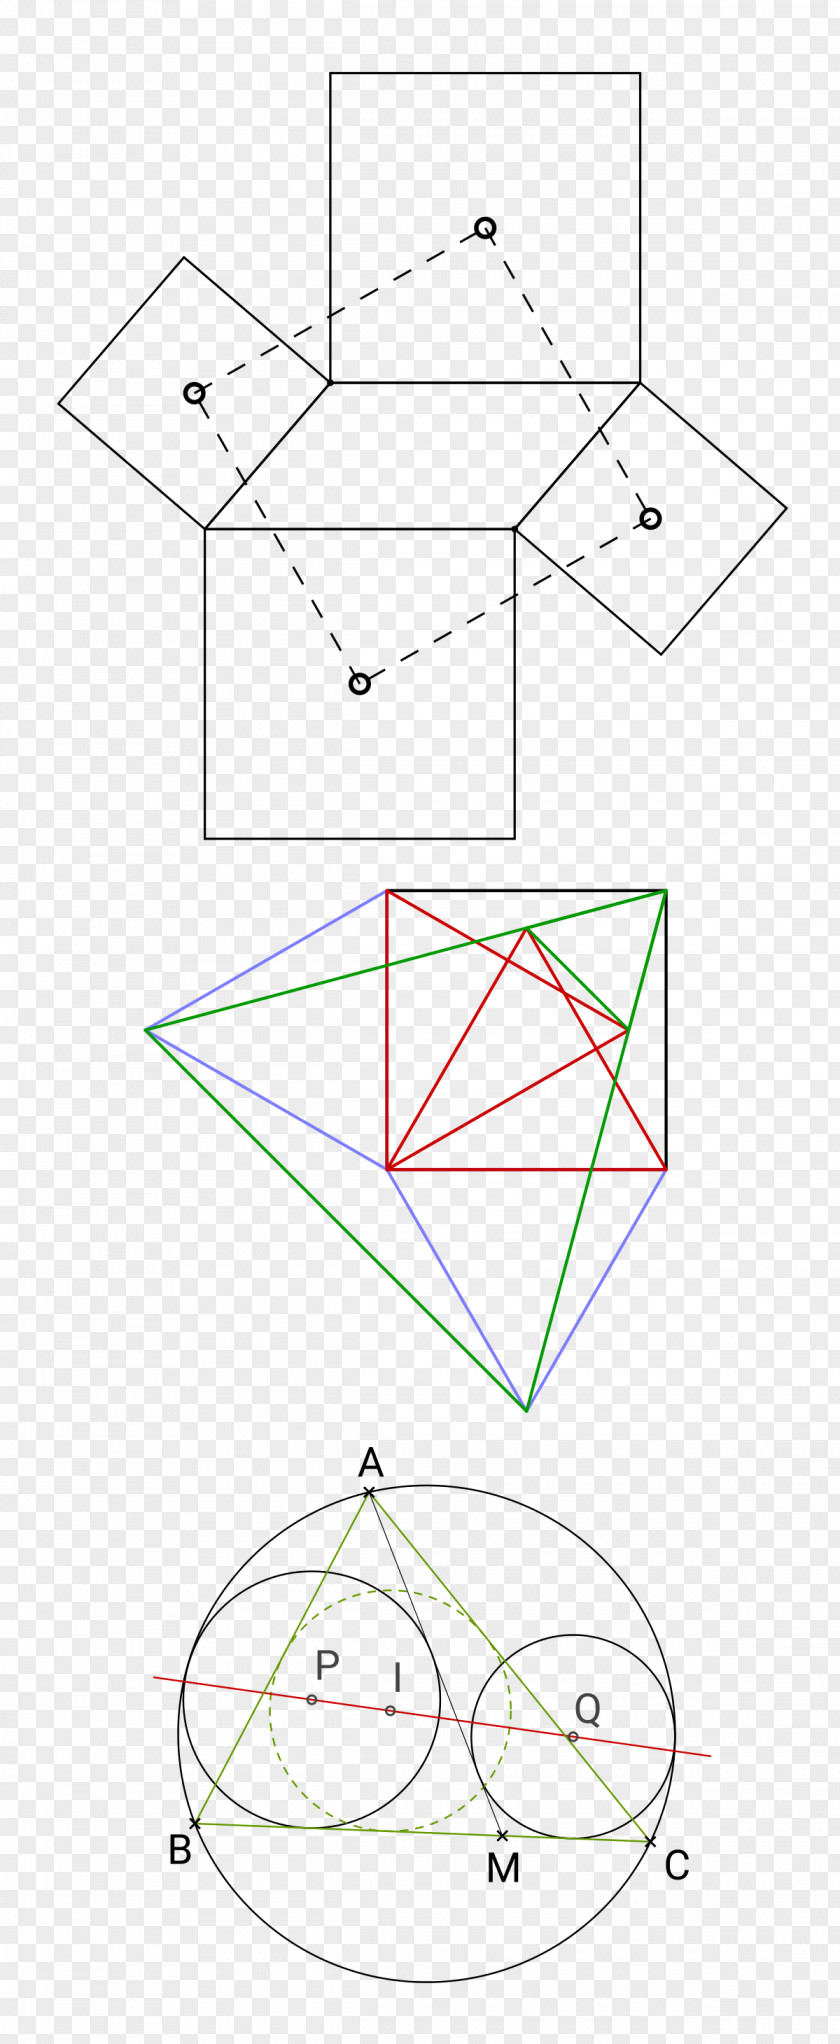 Triangle Van Aubel's Theorem Geometry Quadrilateral Japanese For Cyclic Polygons PNG